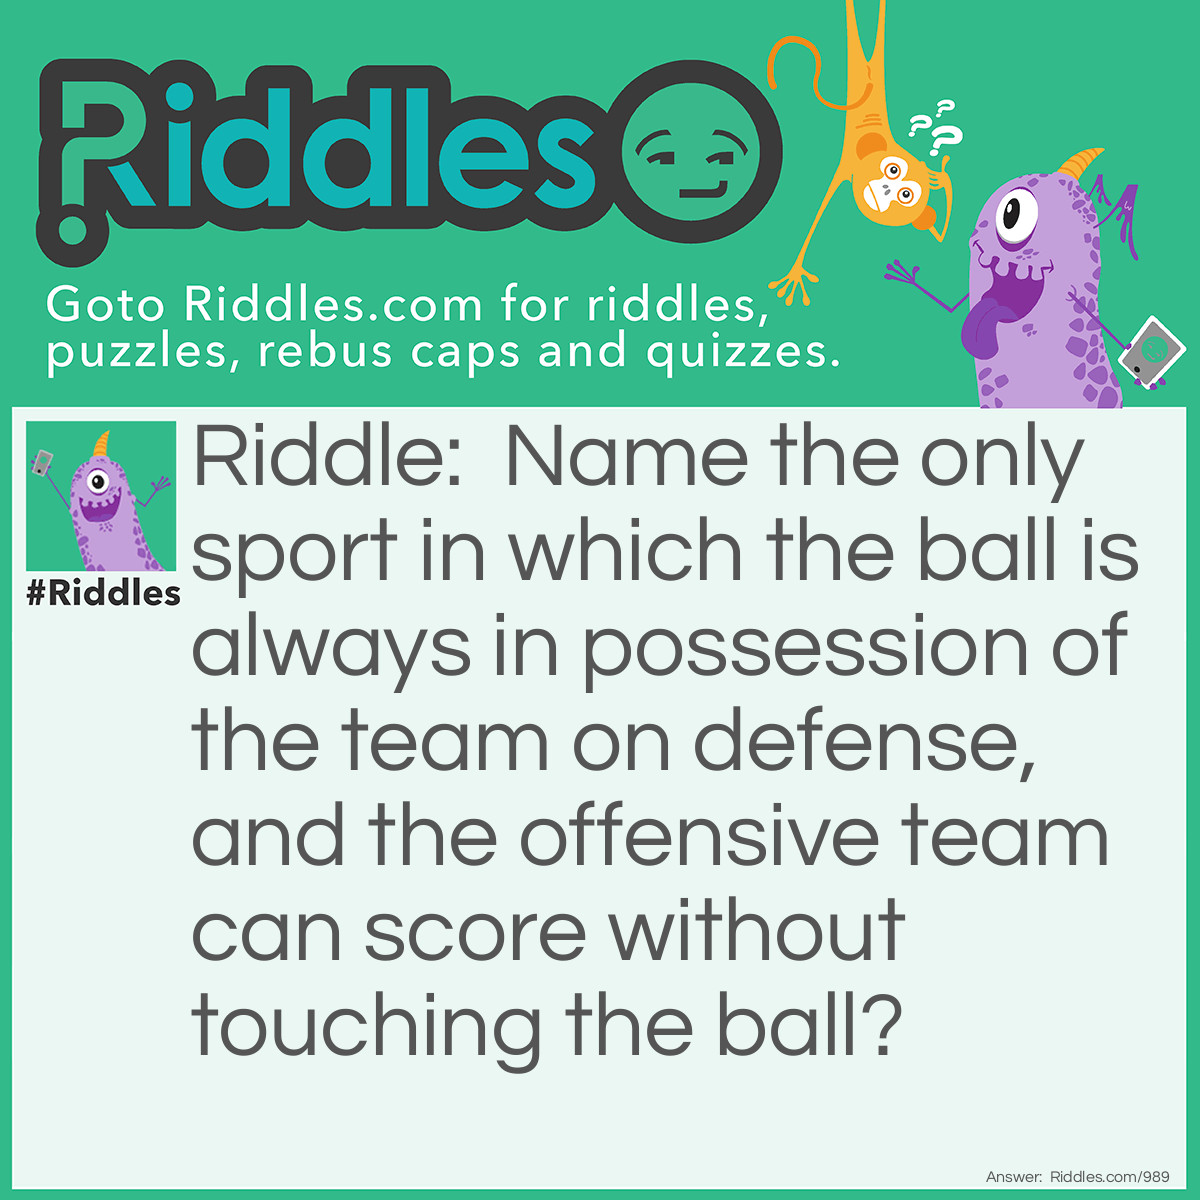 Riddle: Name the only sport in which the ball is always in possession of the team on defense, and the offensive team can score without touching the ball? Answer: Baseball!